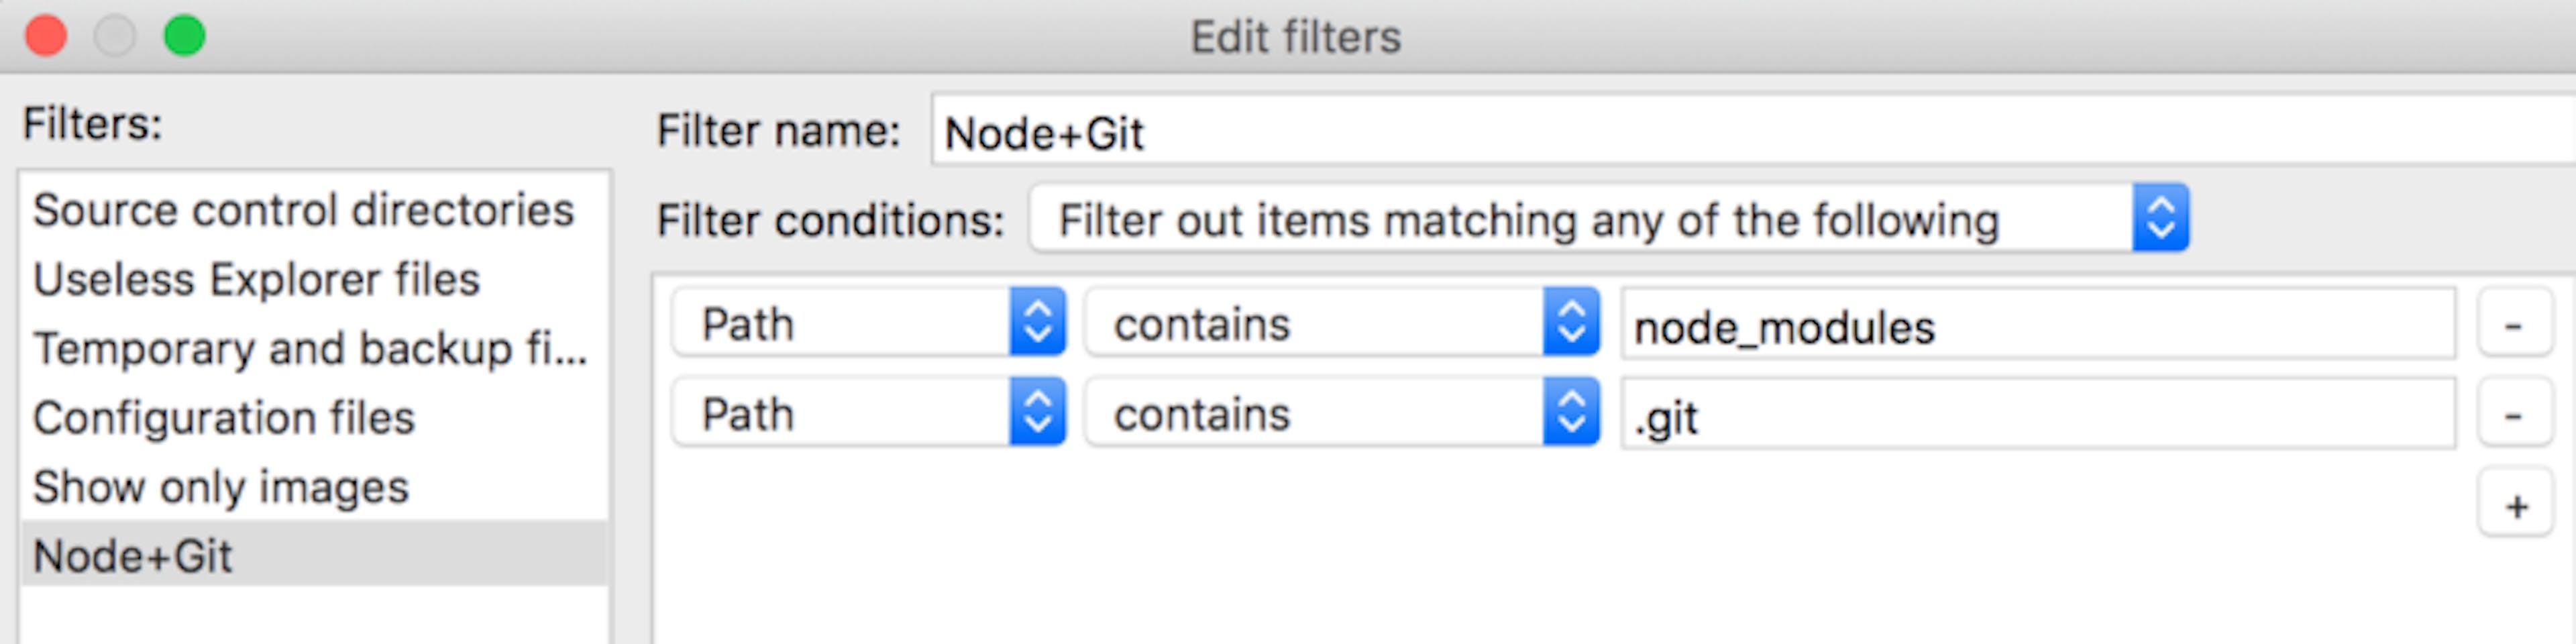 Directory Listing Filters in Filezilla